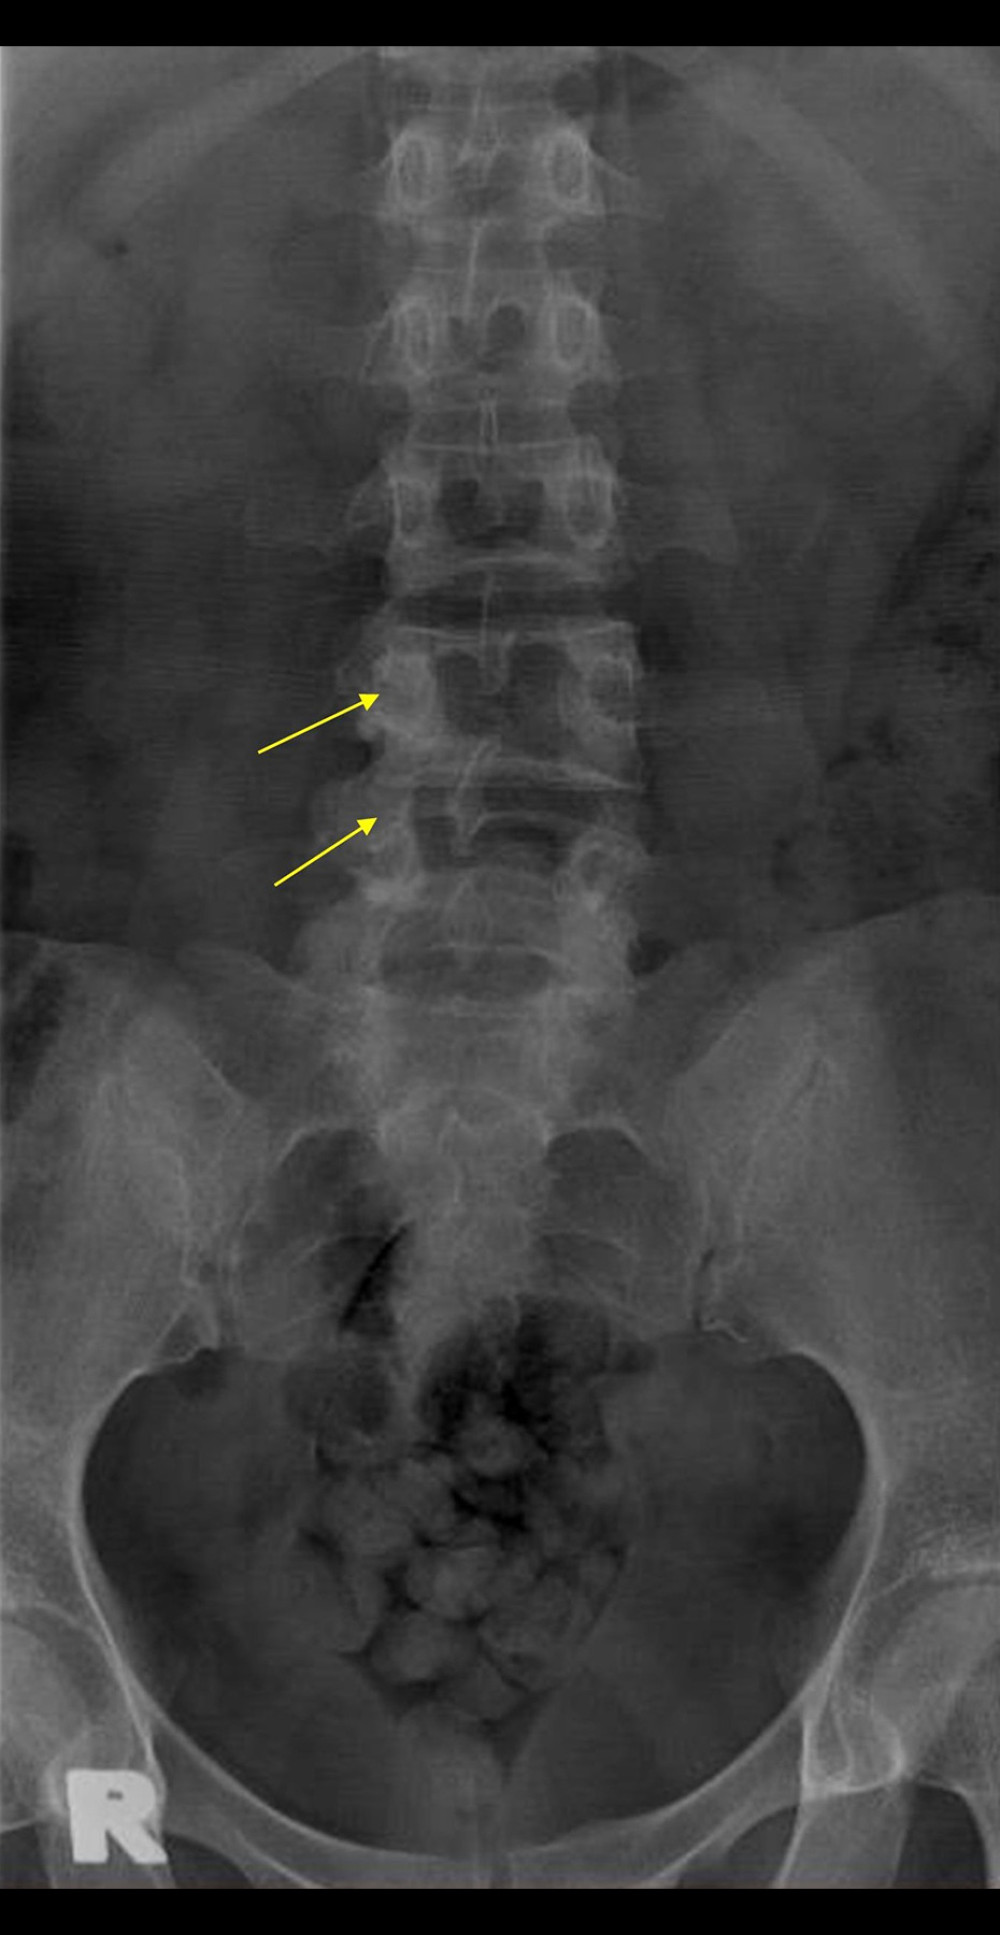 Anteroposterior view of the lumbosacral plain X-ray showing sclerosis and erosion of the right pedicle at the L4 and L5 levels (yellow arrows).